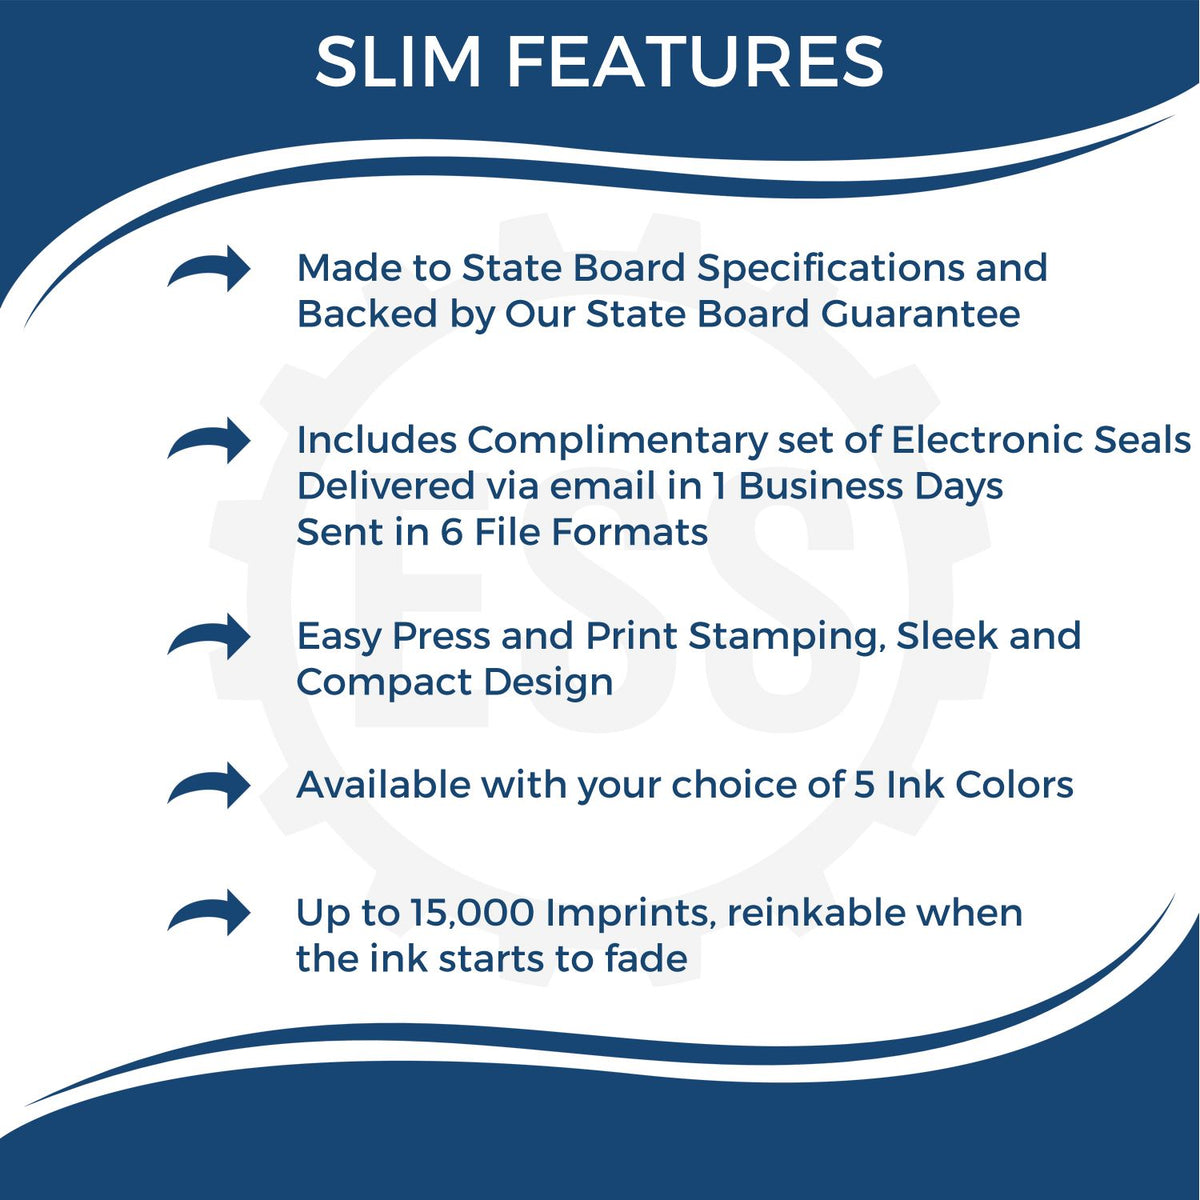 A picture of an infographic highlighting the selling points for the Slim Pre-Inked Texas Landscape Architect Seal Stamp